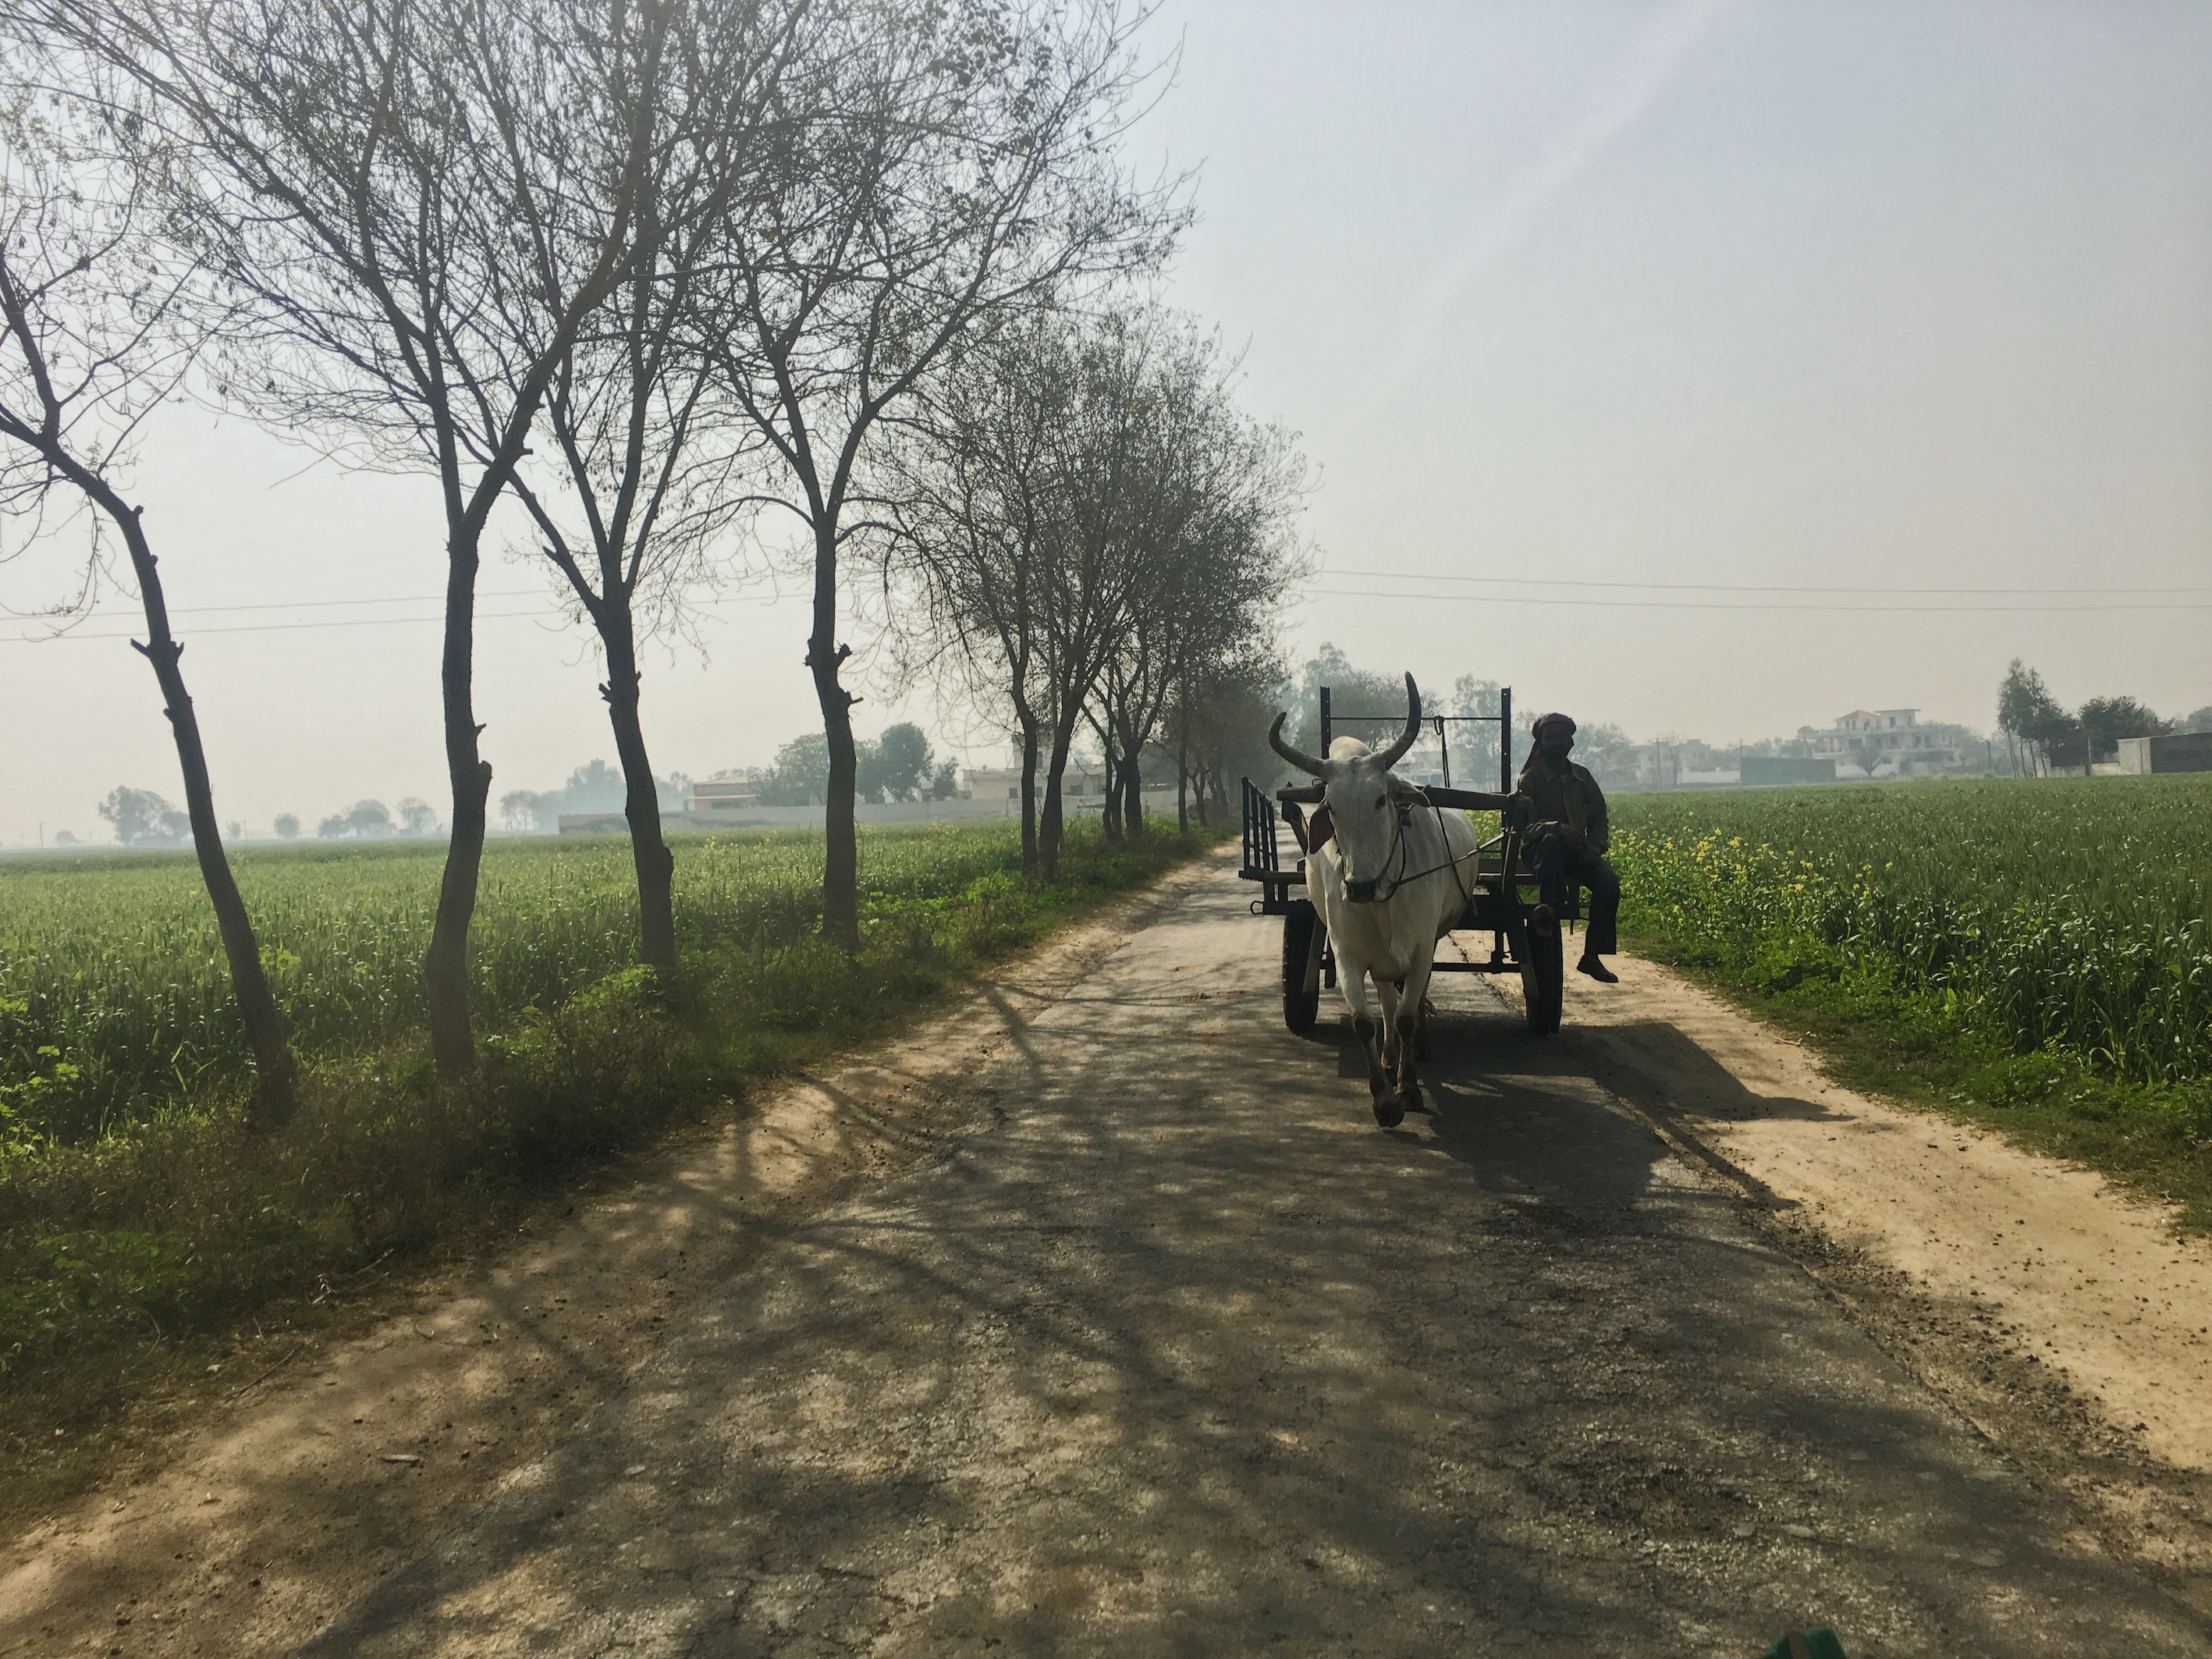 Punjab is one of the most fertile regions in India, it produces 2% of the world's cotton, 2% of its wheat and 1% of its rice. In photograph: Farmer headed home after a long day.